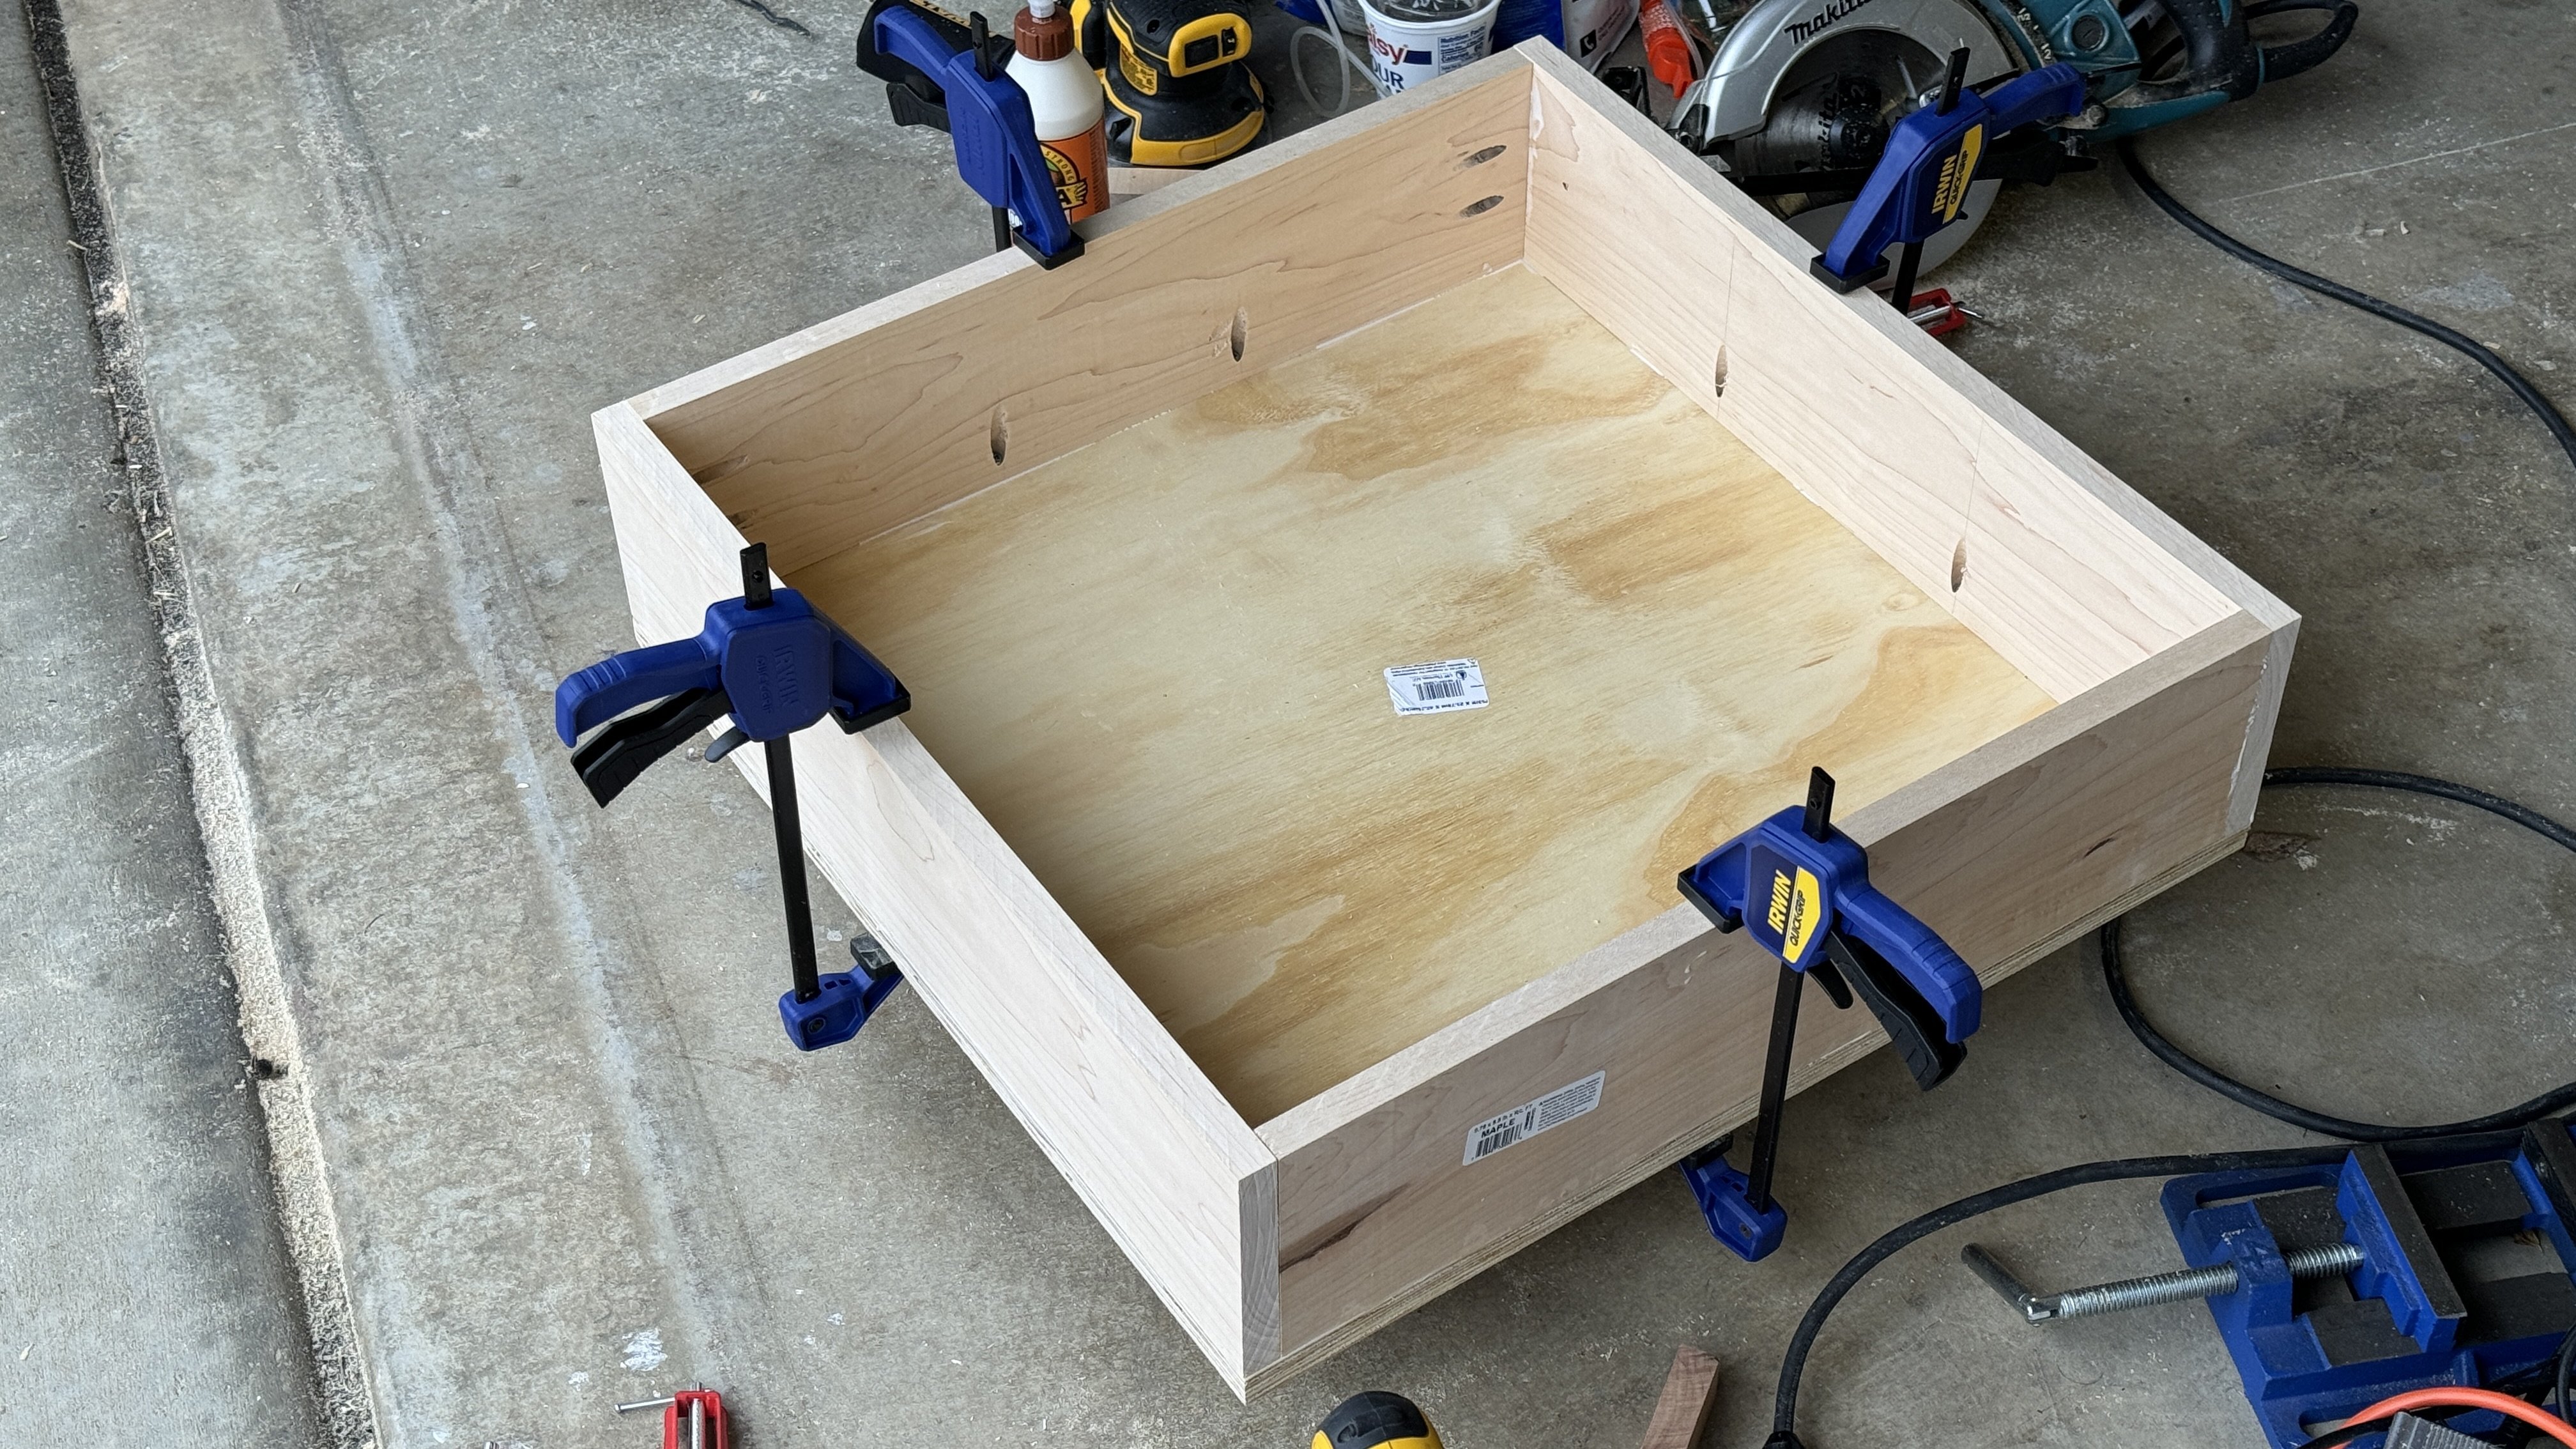 One of my first woodworking builds, a simple drawer